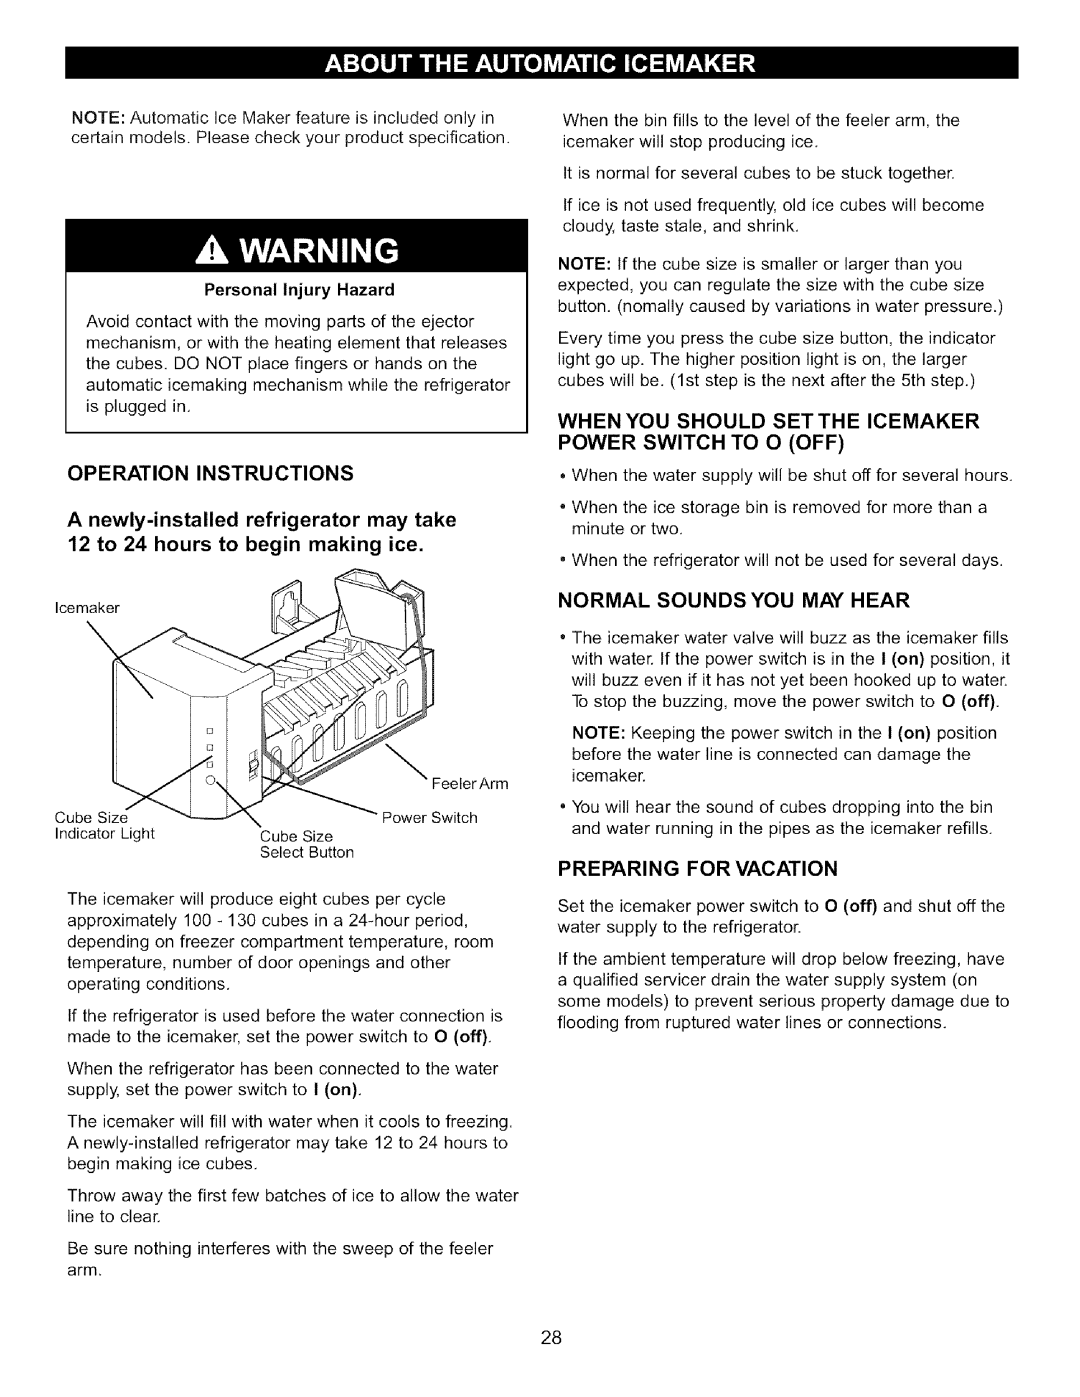 LG Electronics LFC22760 manual Operation Instructions, When You Should Setthe Icemaker, Power Switch To O Off 